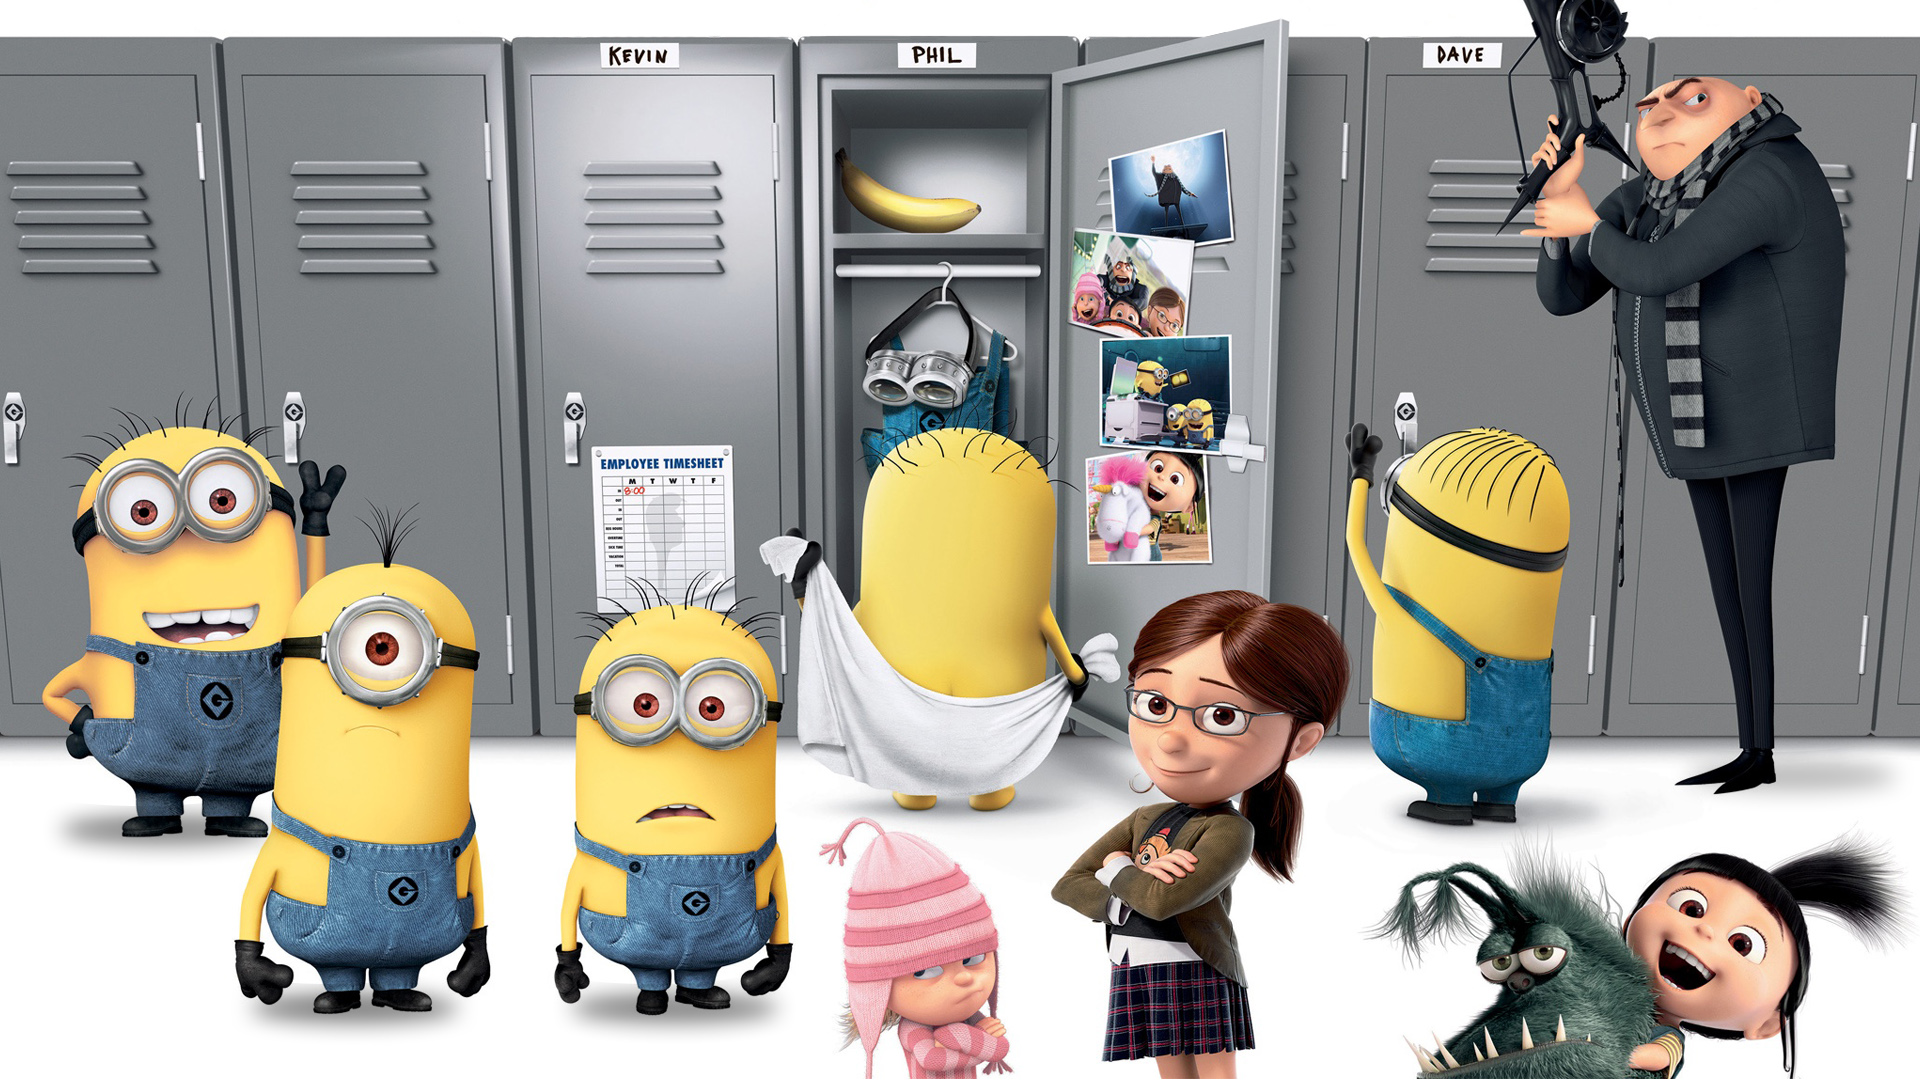 Movie Despicable Me 2 HD Wallpaper | Background Image